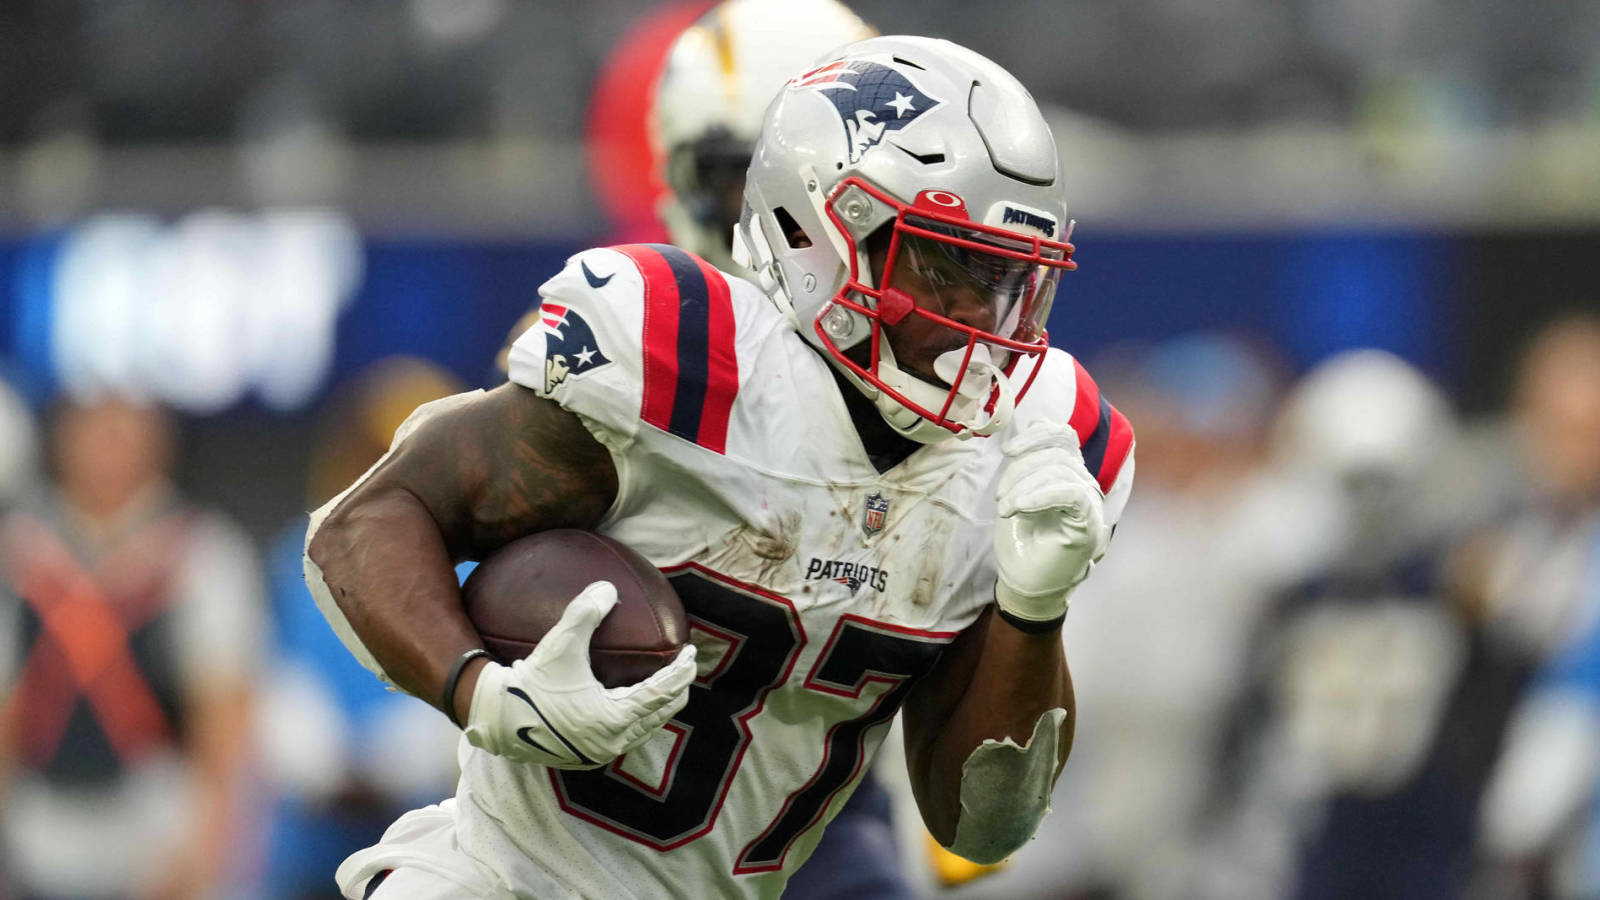 Patriots' Harris likely to play; Falcons' Patterson unlikely